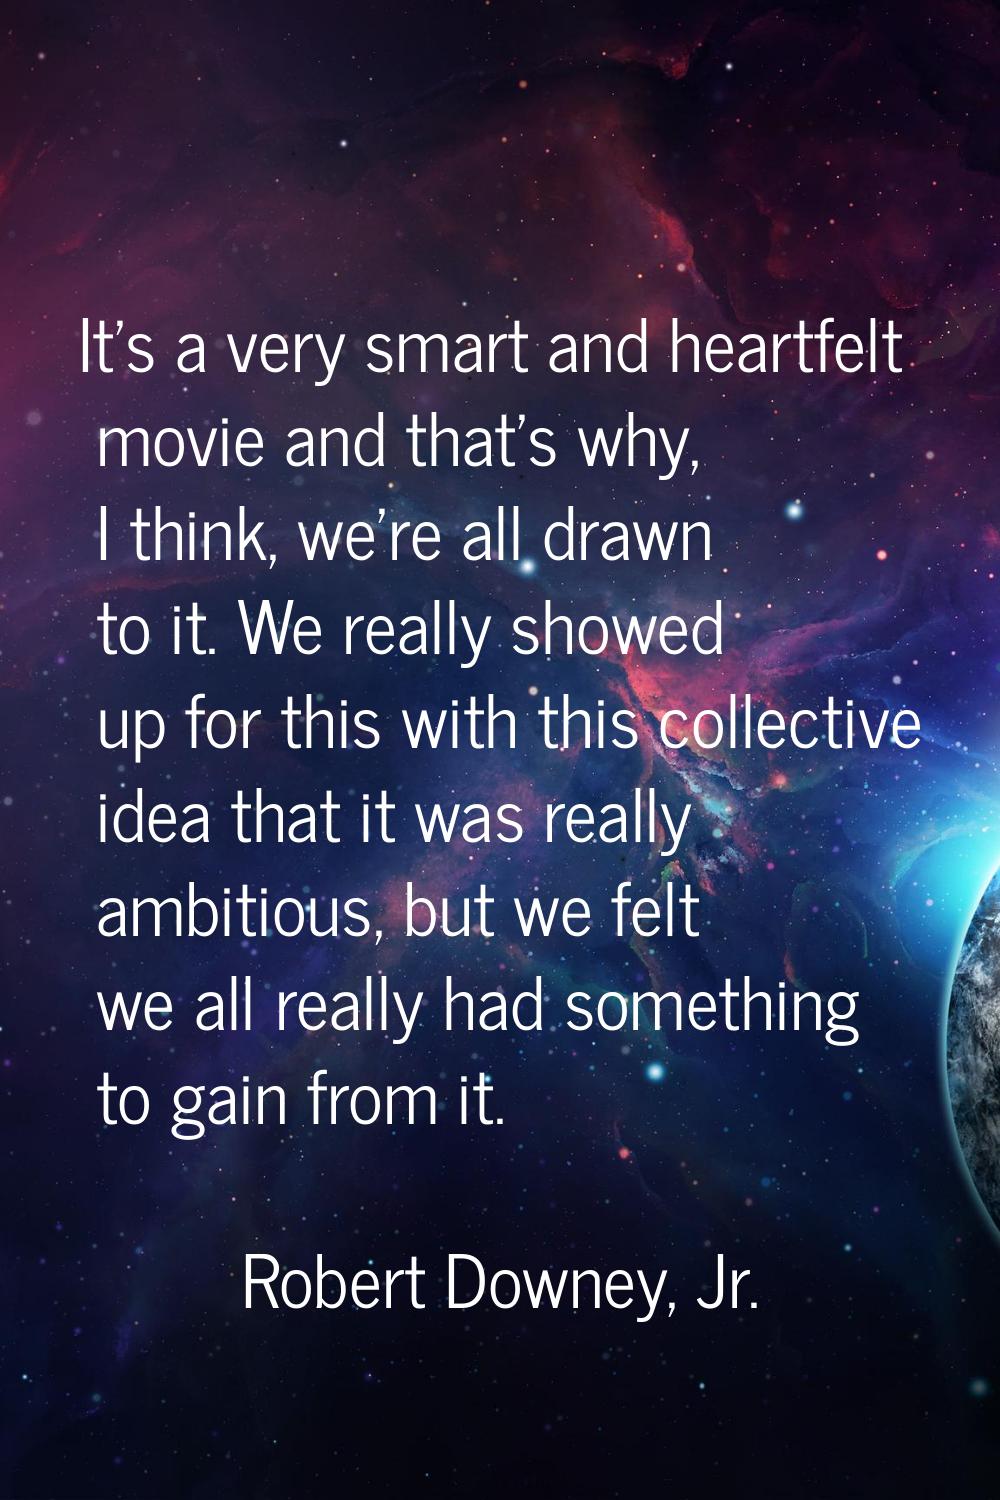 It's a very smart and heartfelt movie and that's why, I think, we're all drawn to it. We really sho